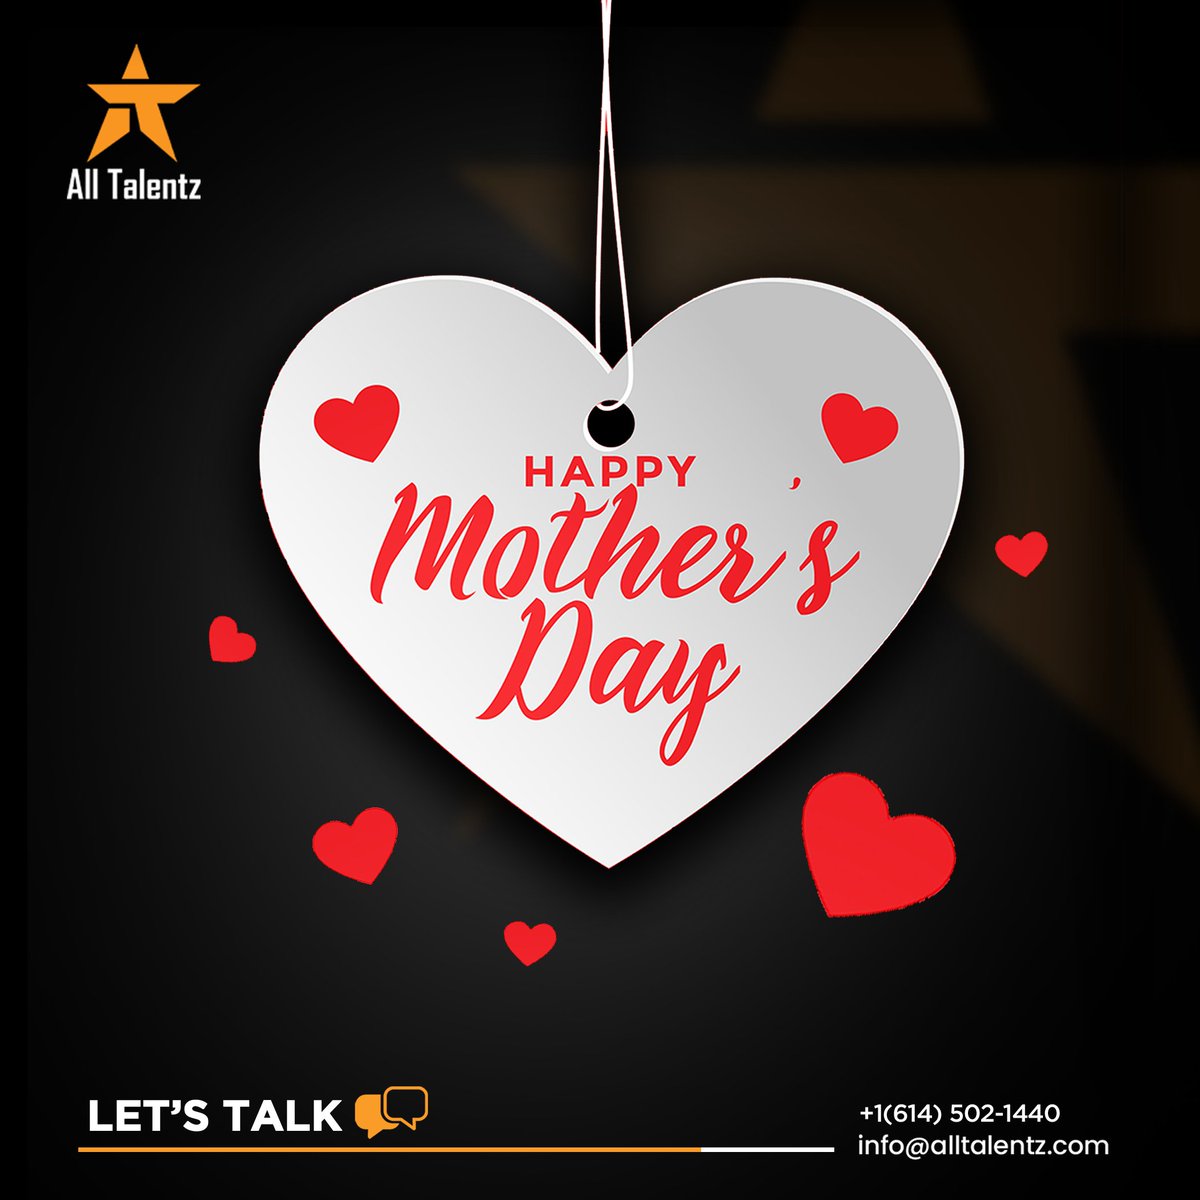 Warmest wishes to all the incredible moms who balance it all, motherhood, work, and everything in between. We wish you a day filled with joy and relaxation.

#happymothersday
#mothersday 
#mumsday 
#celebratingmothers 
#mothersdaycelebration 
#Alltalentz 
#reynoldsburg